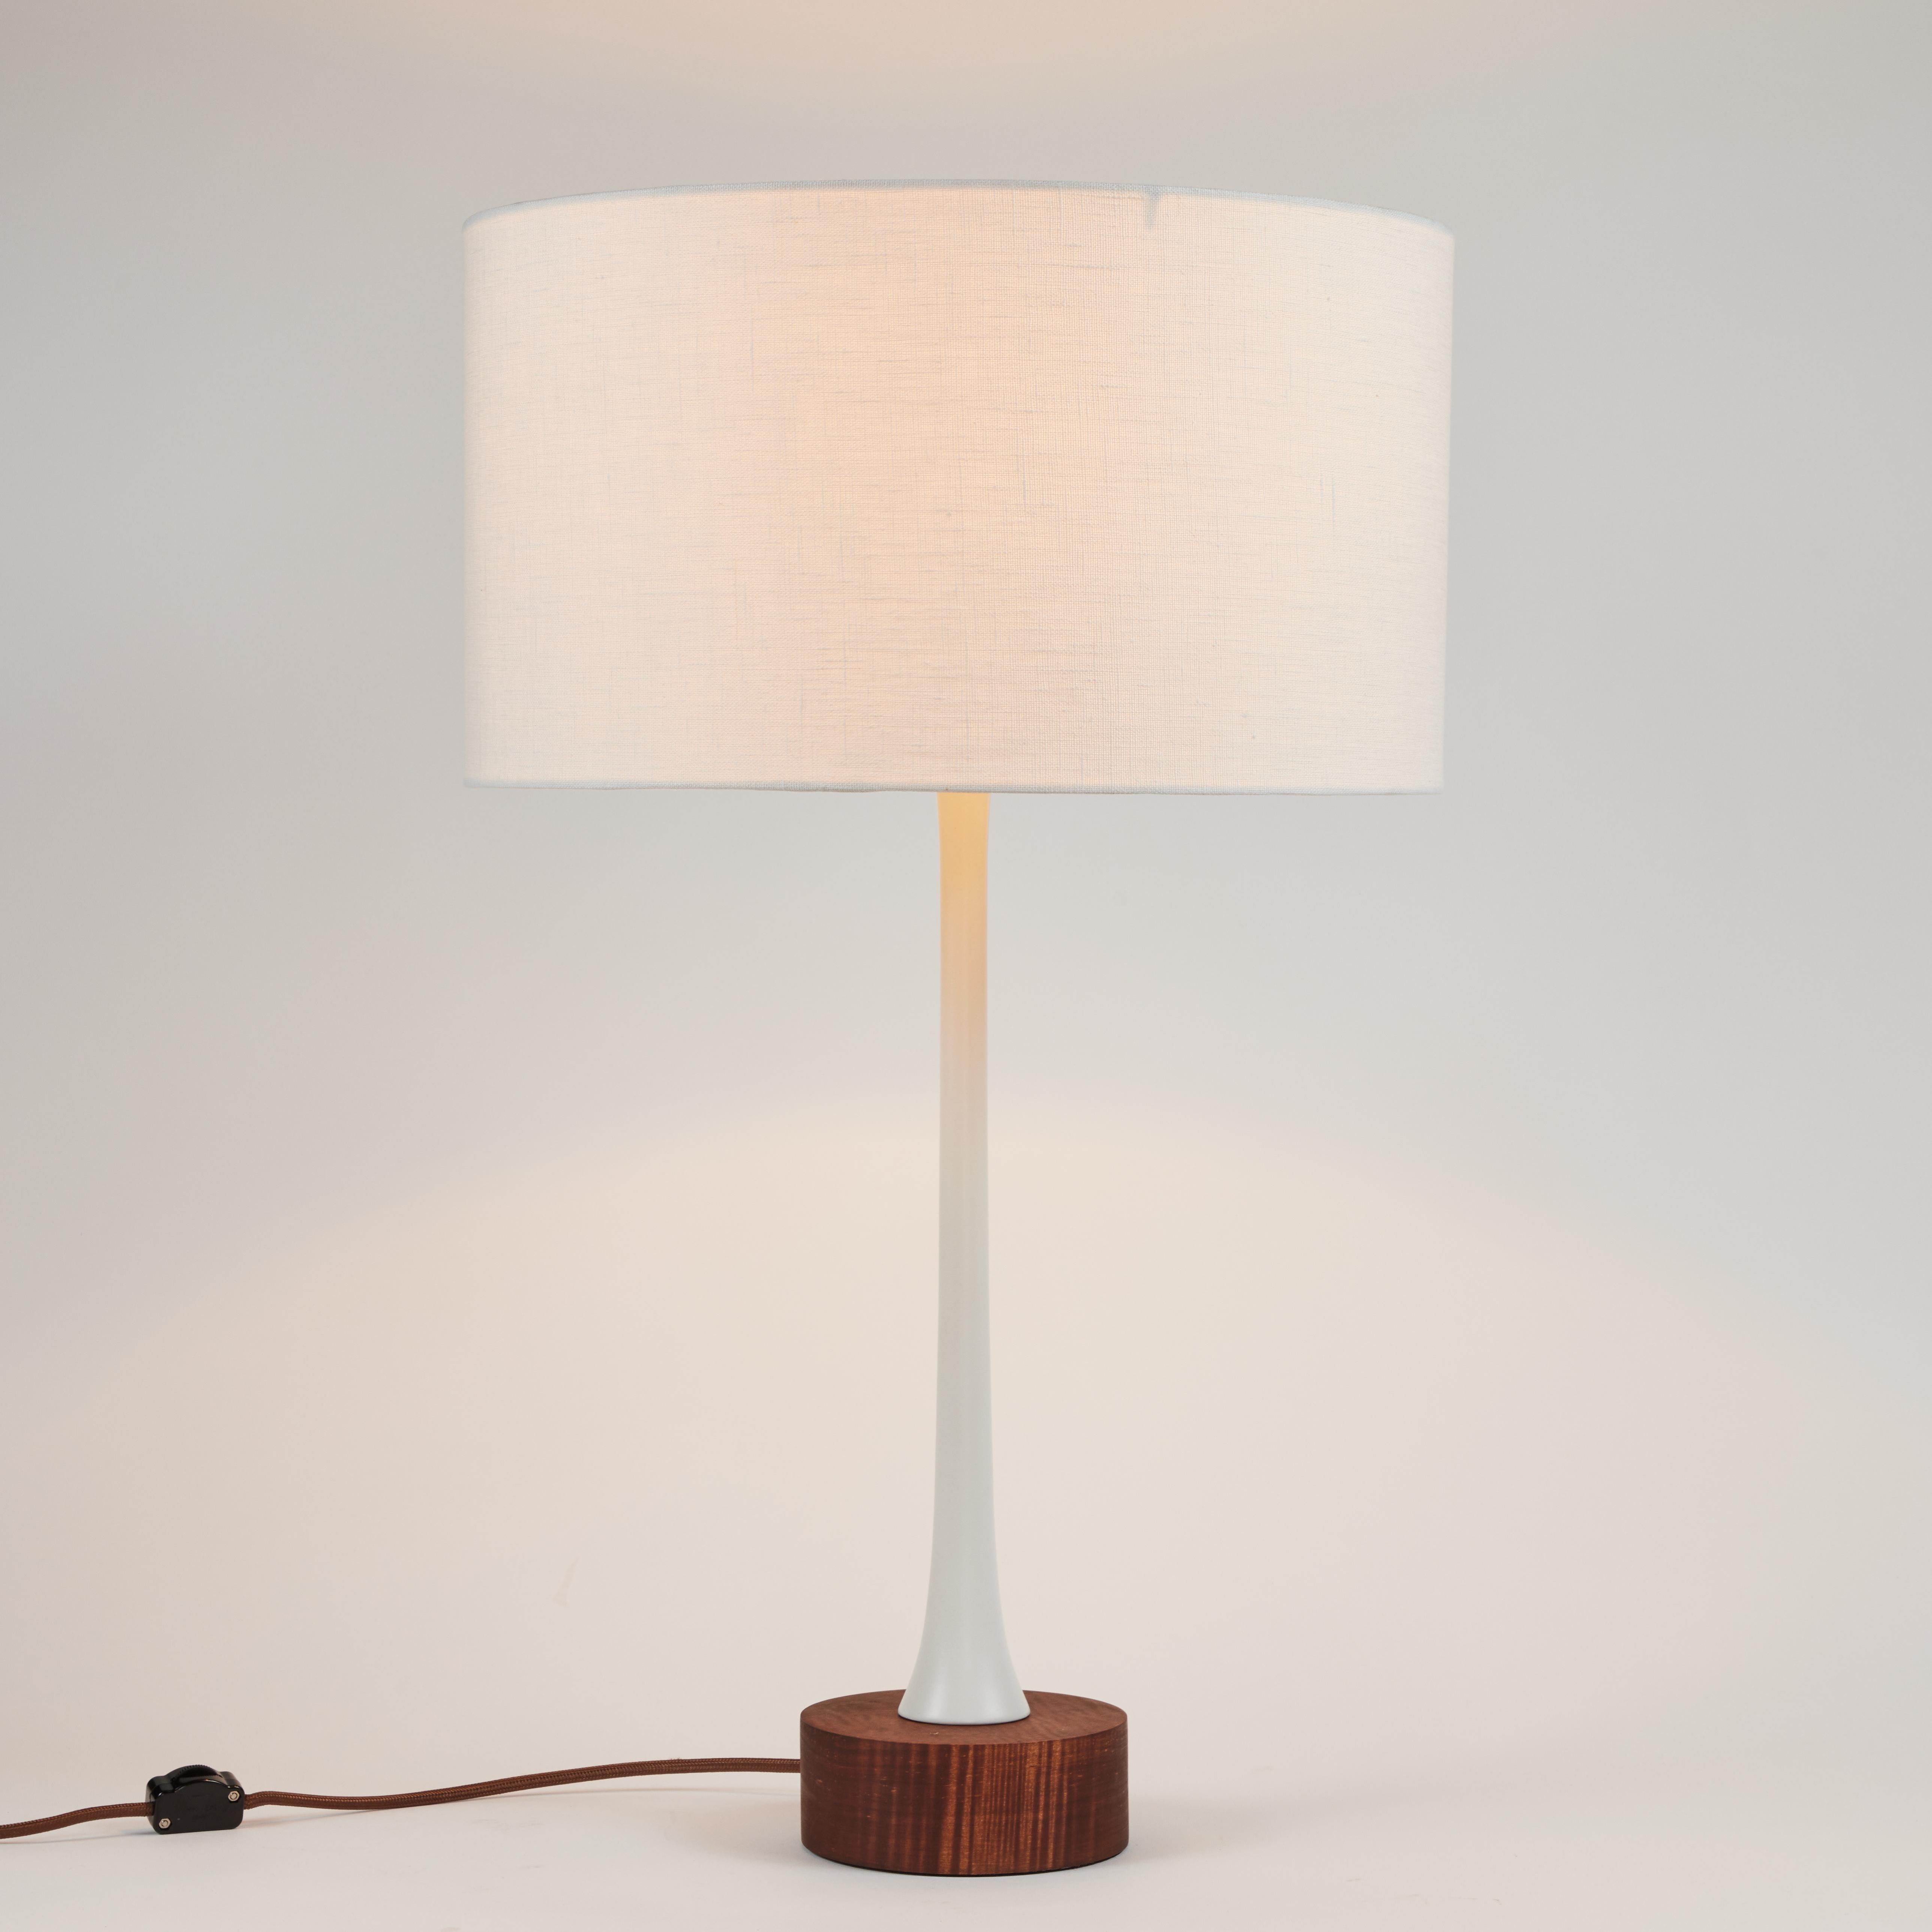 'Sofi' metal and wood table lamp by Alvaro Benitez. Hand-fabricated by Los Angeles based designer and lighting professional Alvaro Benitez, these highly refined table lamps are reminiscent of the iconic midcentury Italian designs of Eero Saarinen